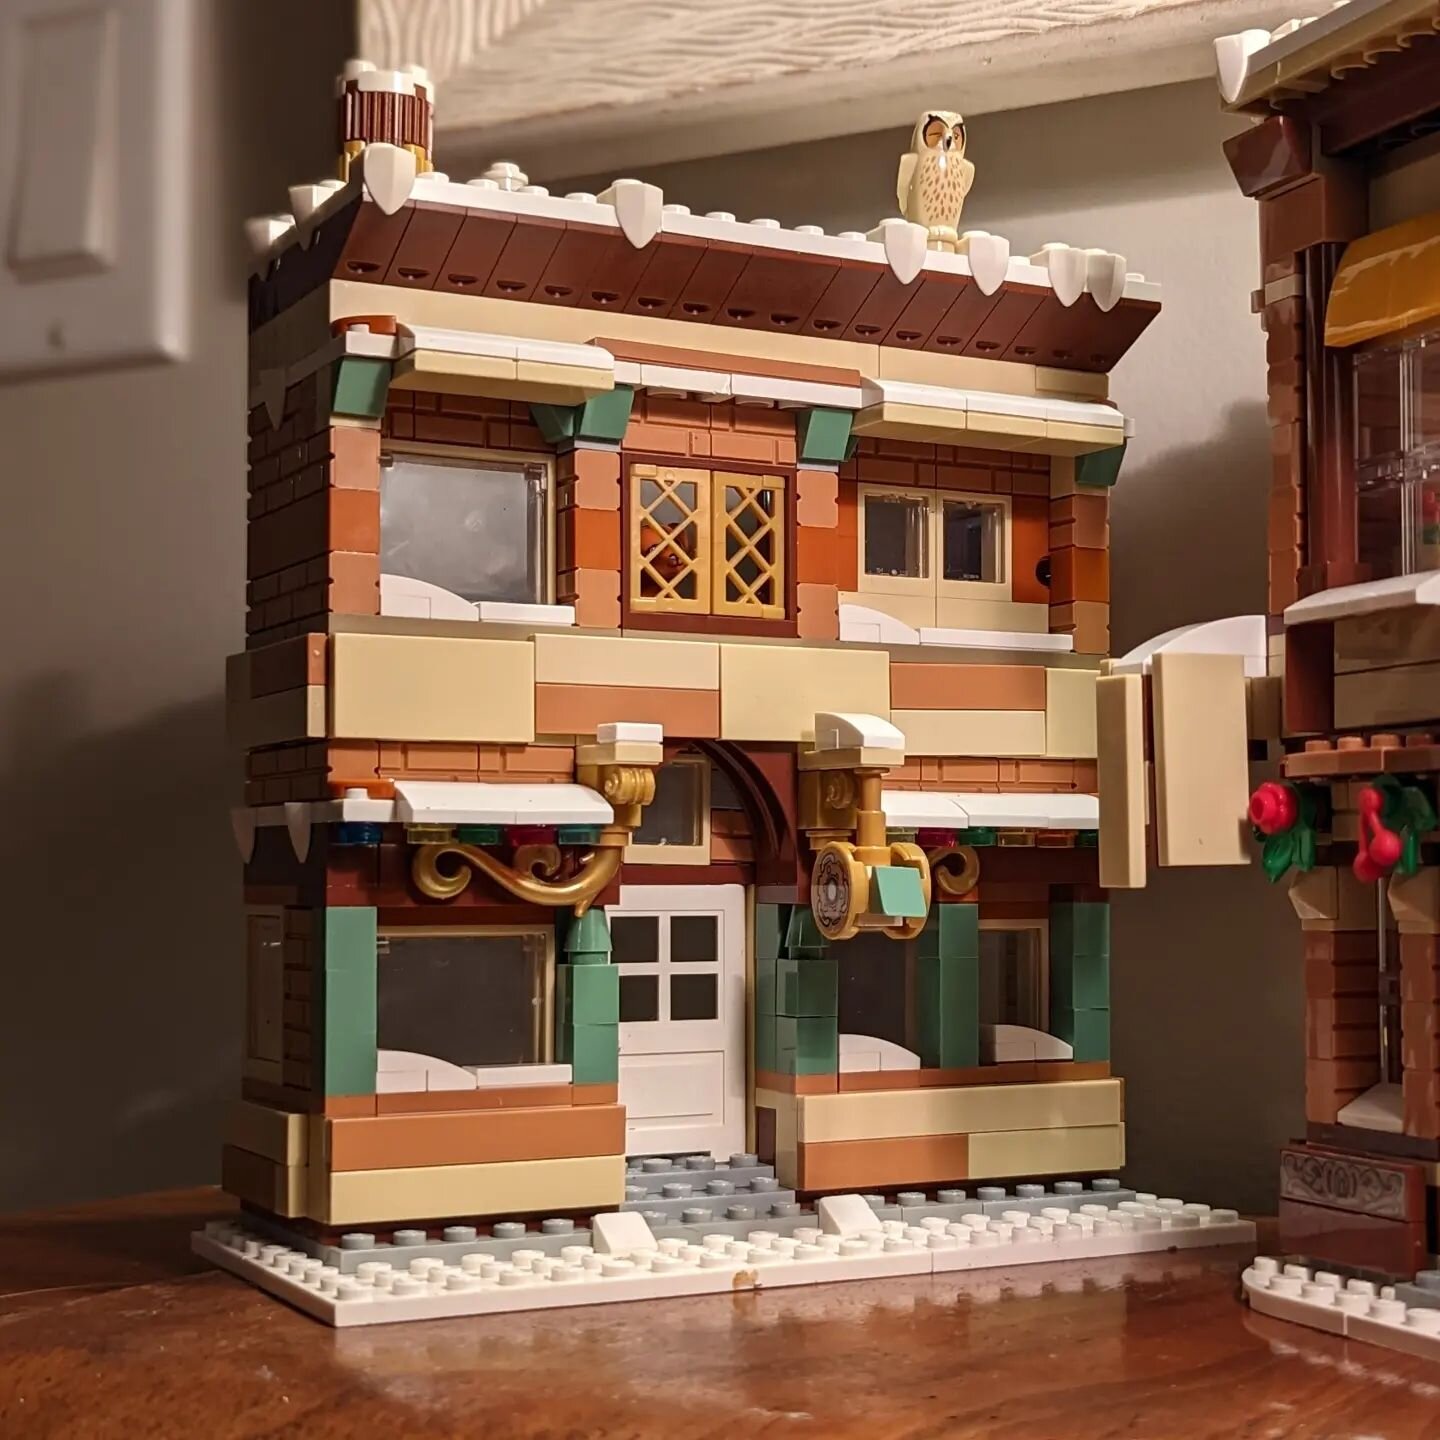 Second custom Christmas Town building done. I think this is a village now? And I can stop? #lego #legomoc